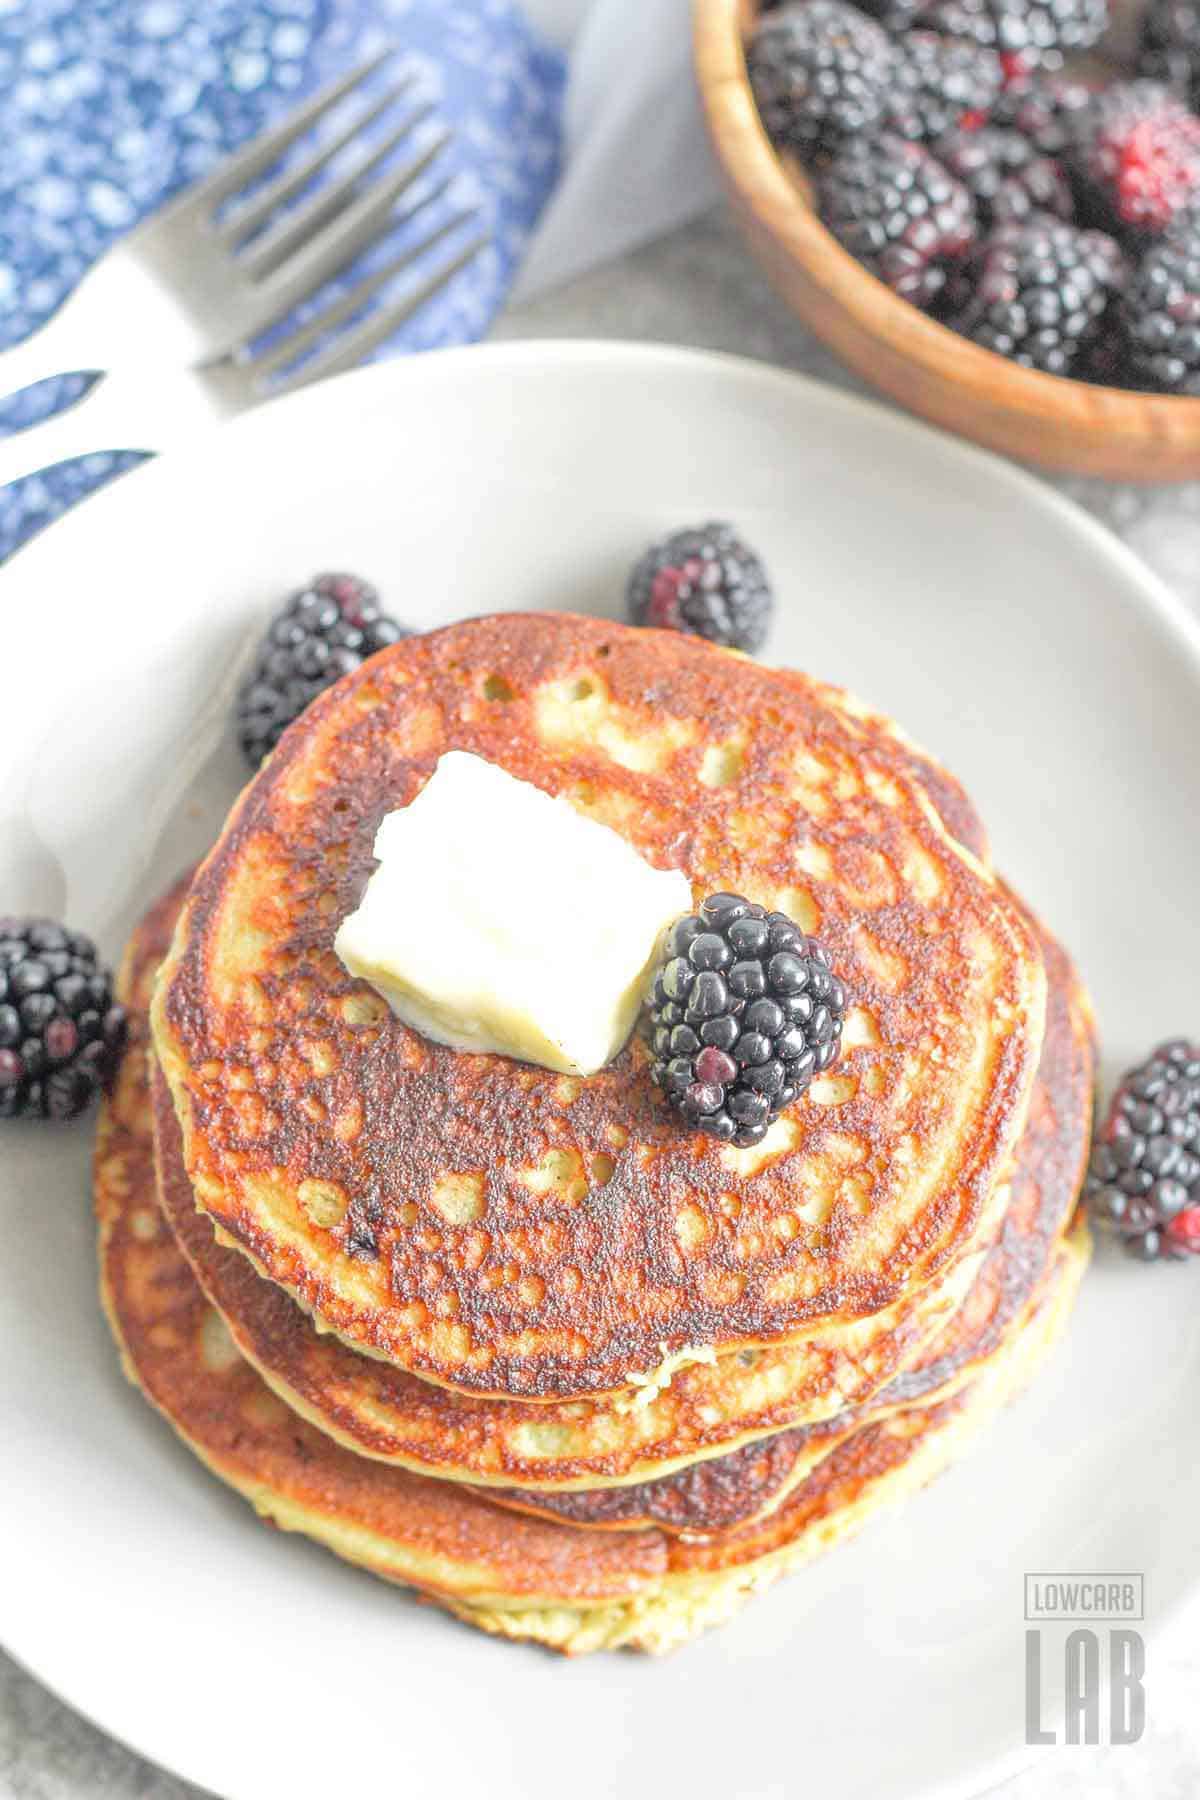 Low carb blackberry pancakes recipe done ready to eat